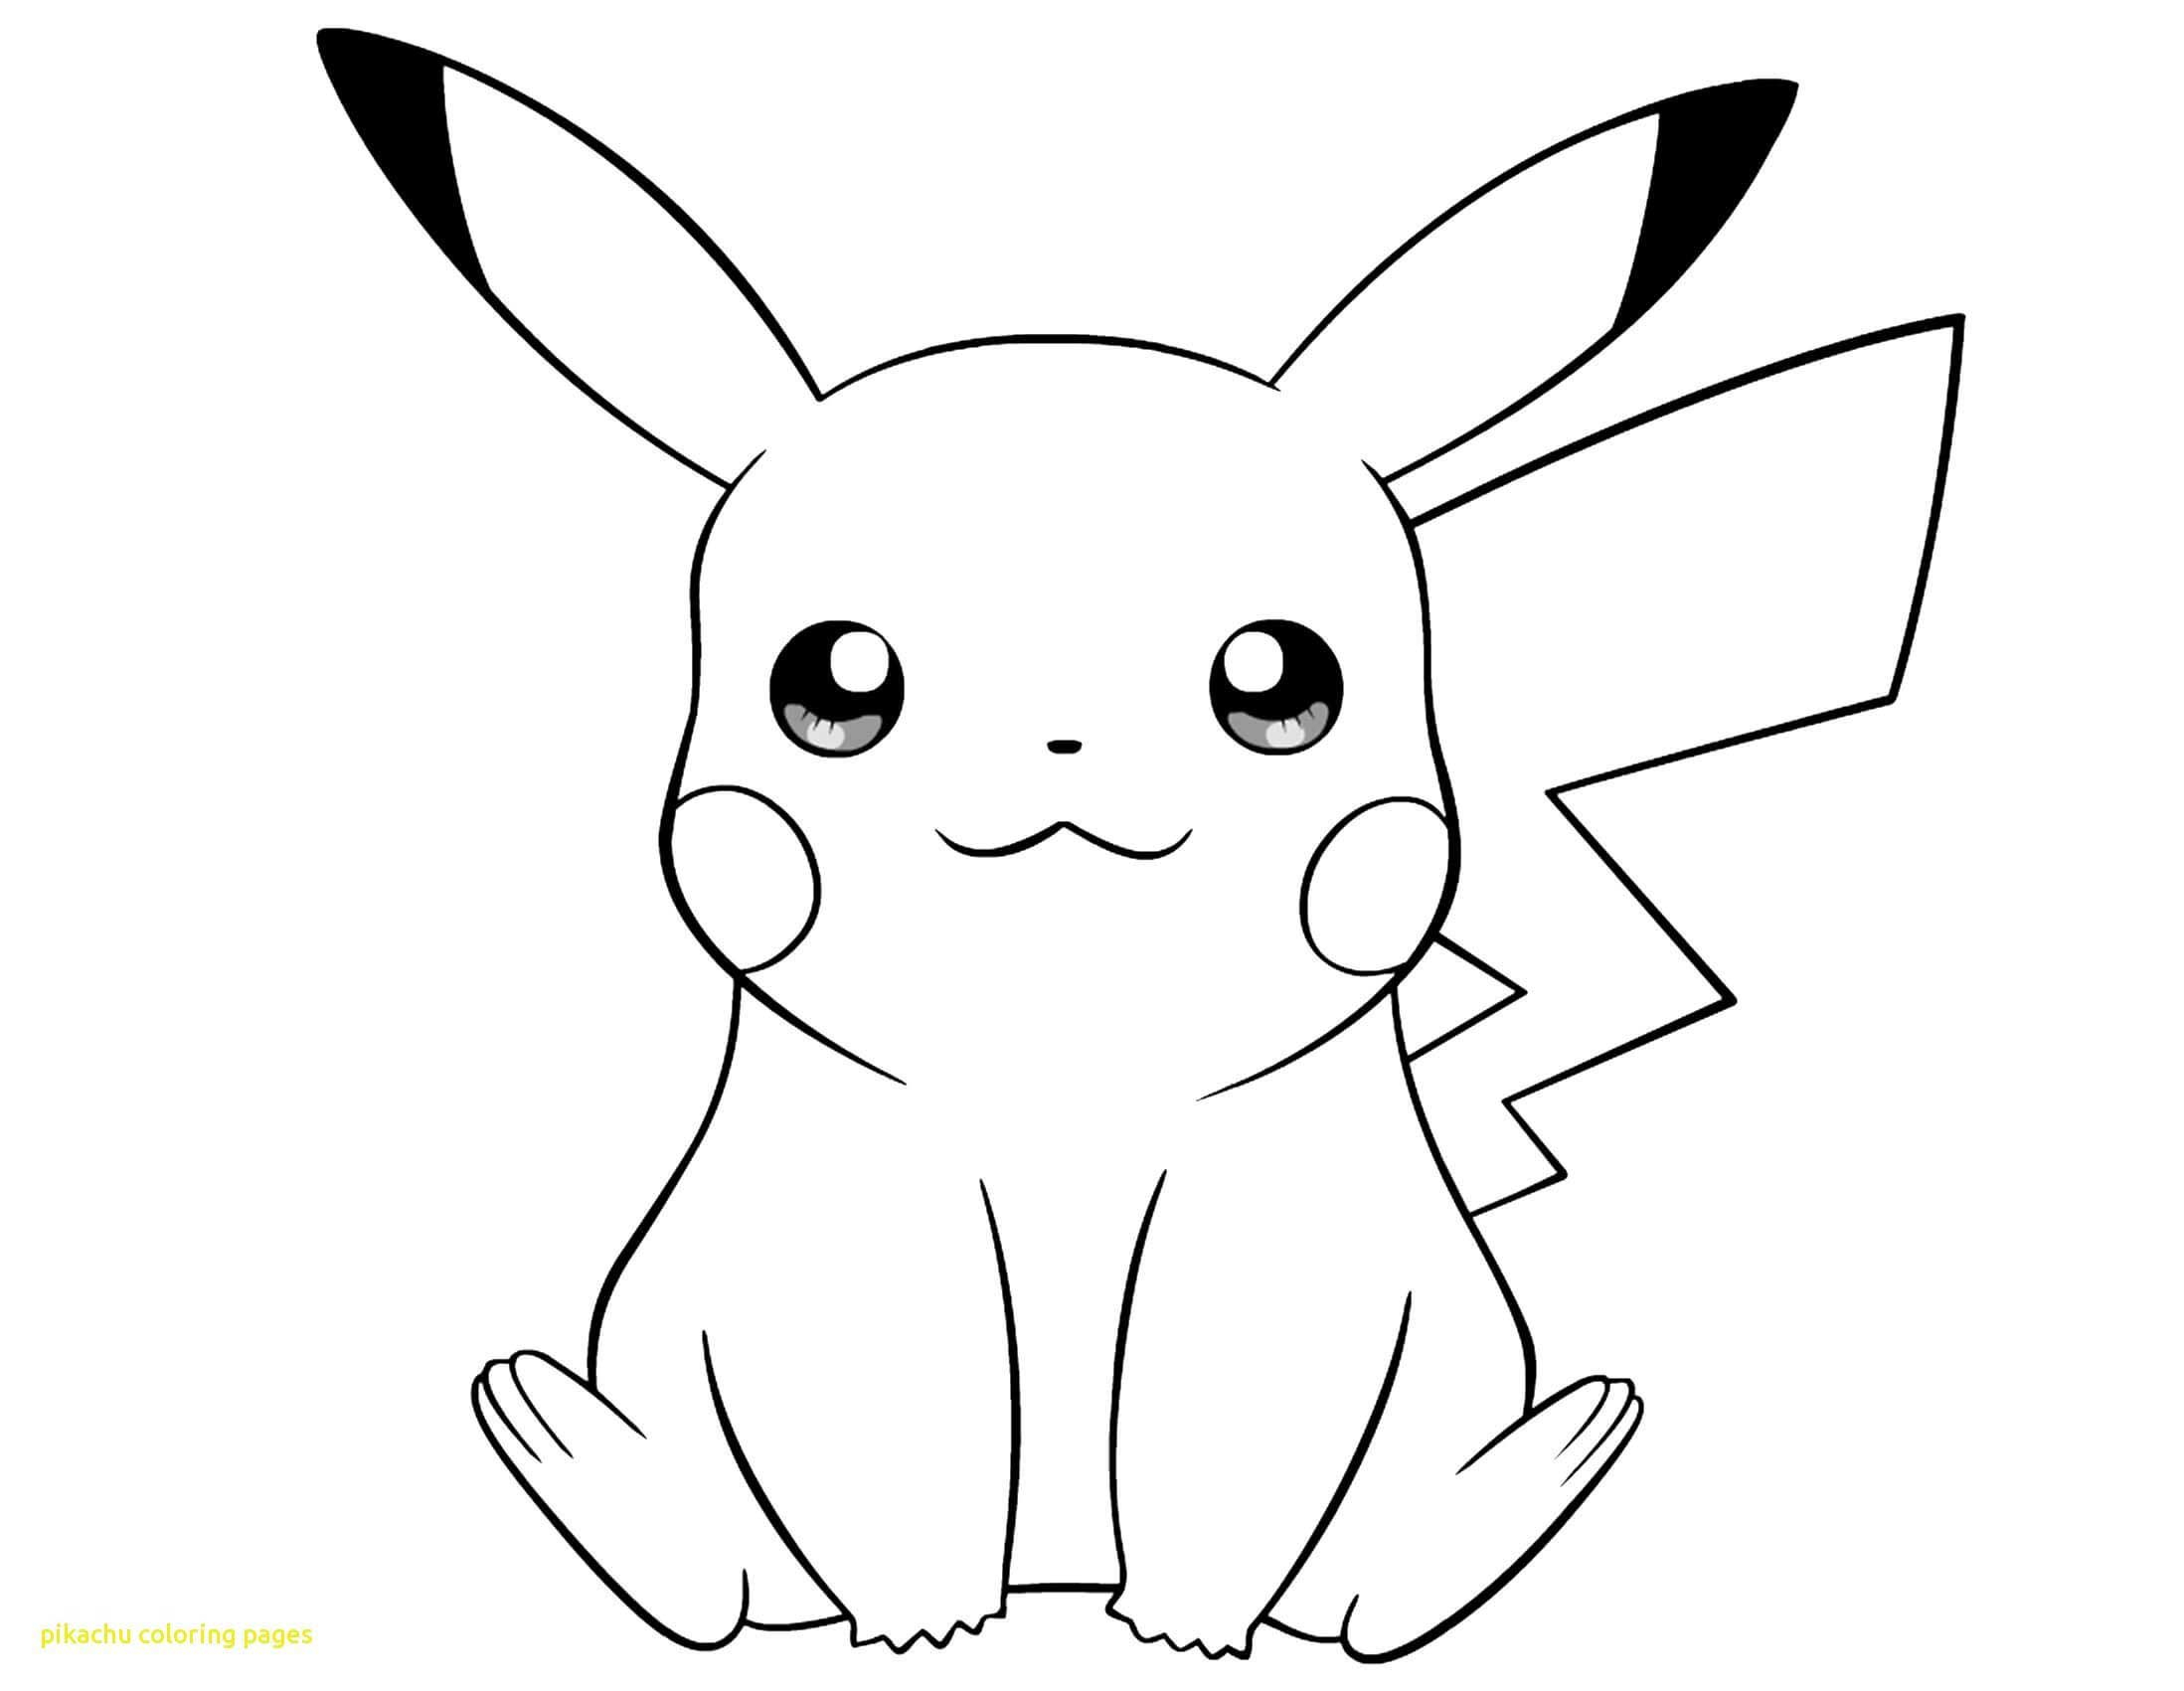 Pikachu Libre Coloring Page Ash Coloring Pages 650503 Free Coloring Pages Online Pokemon With